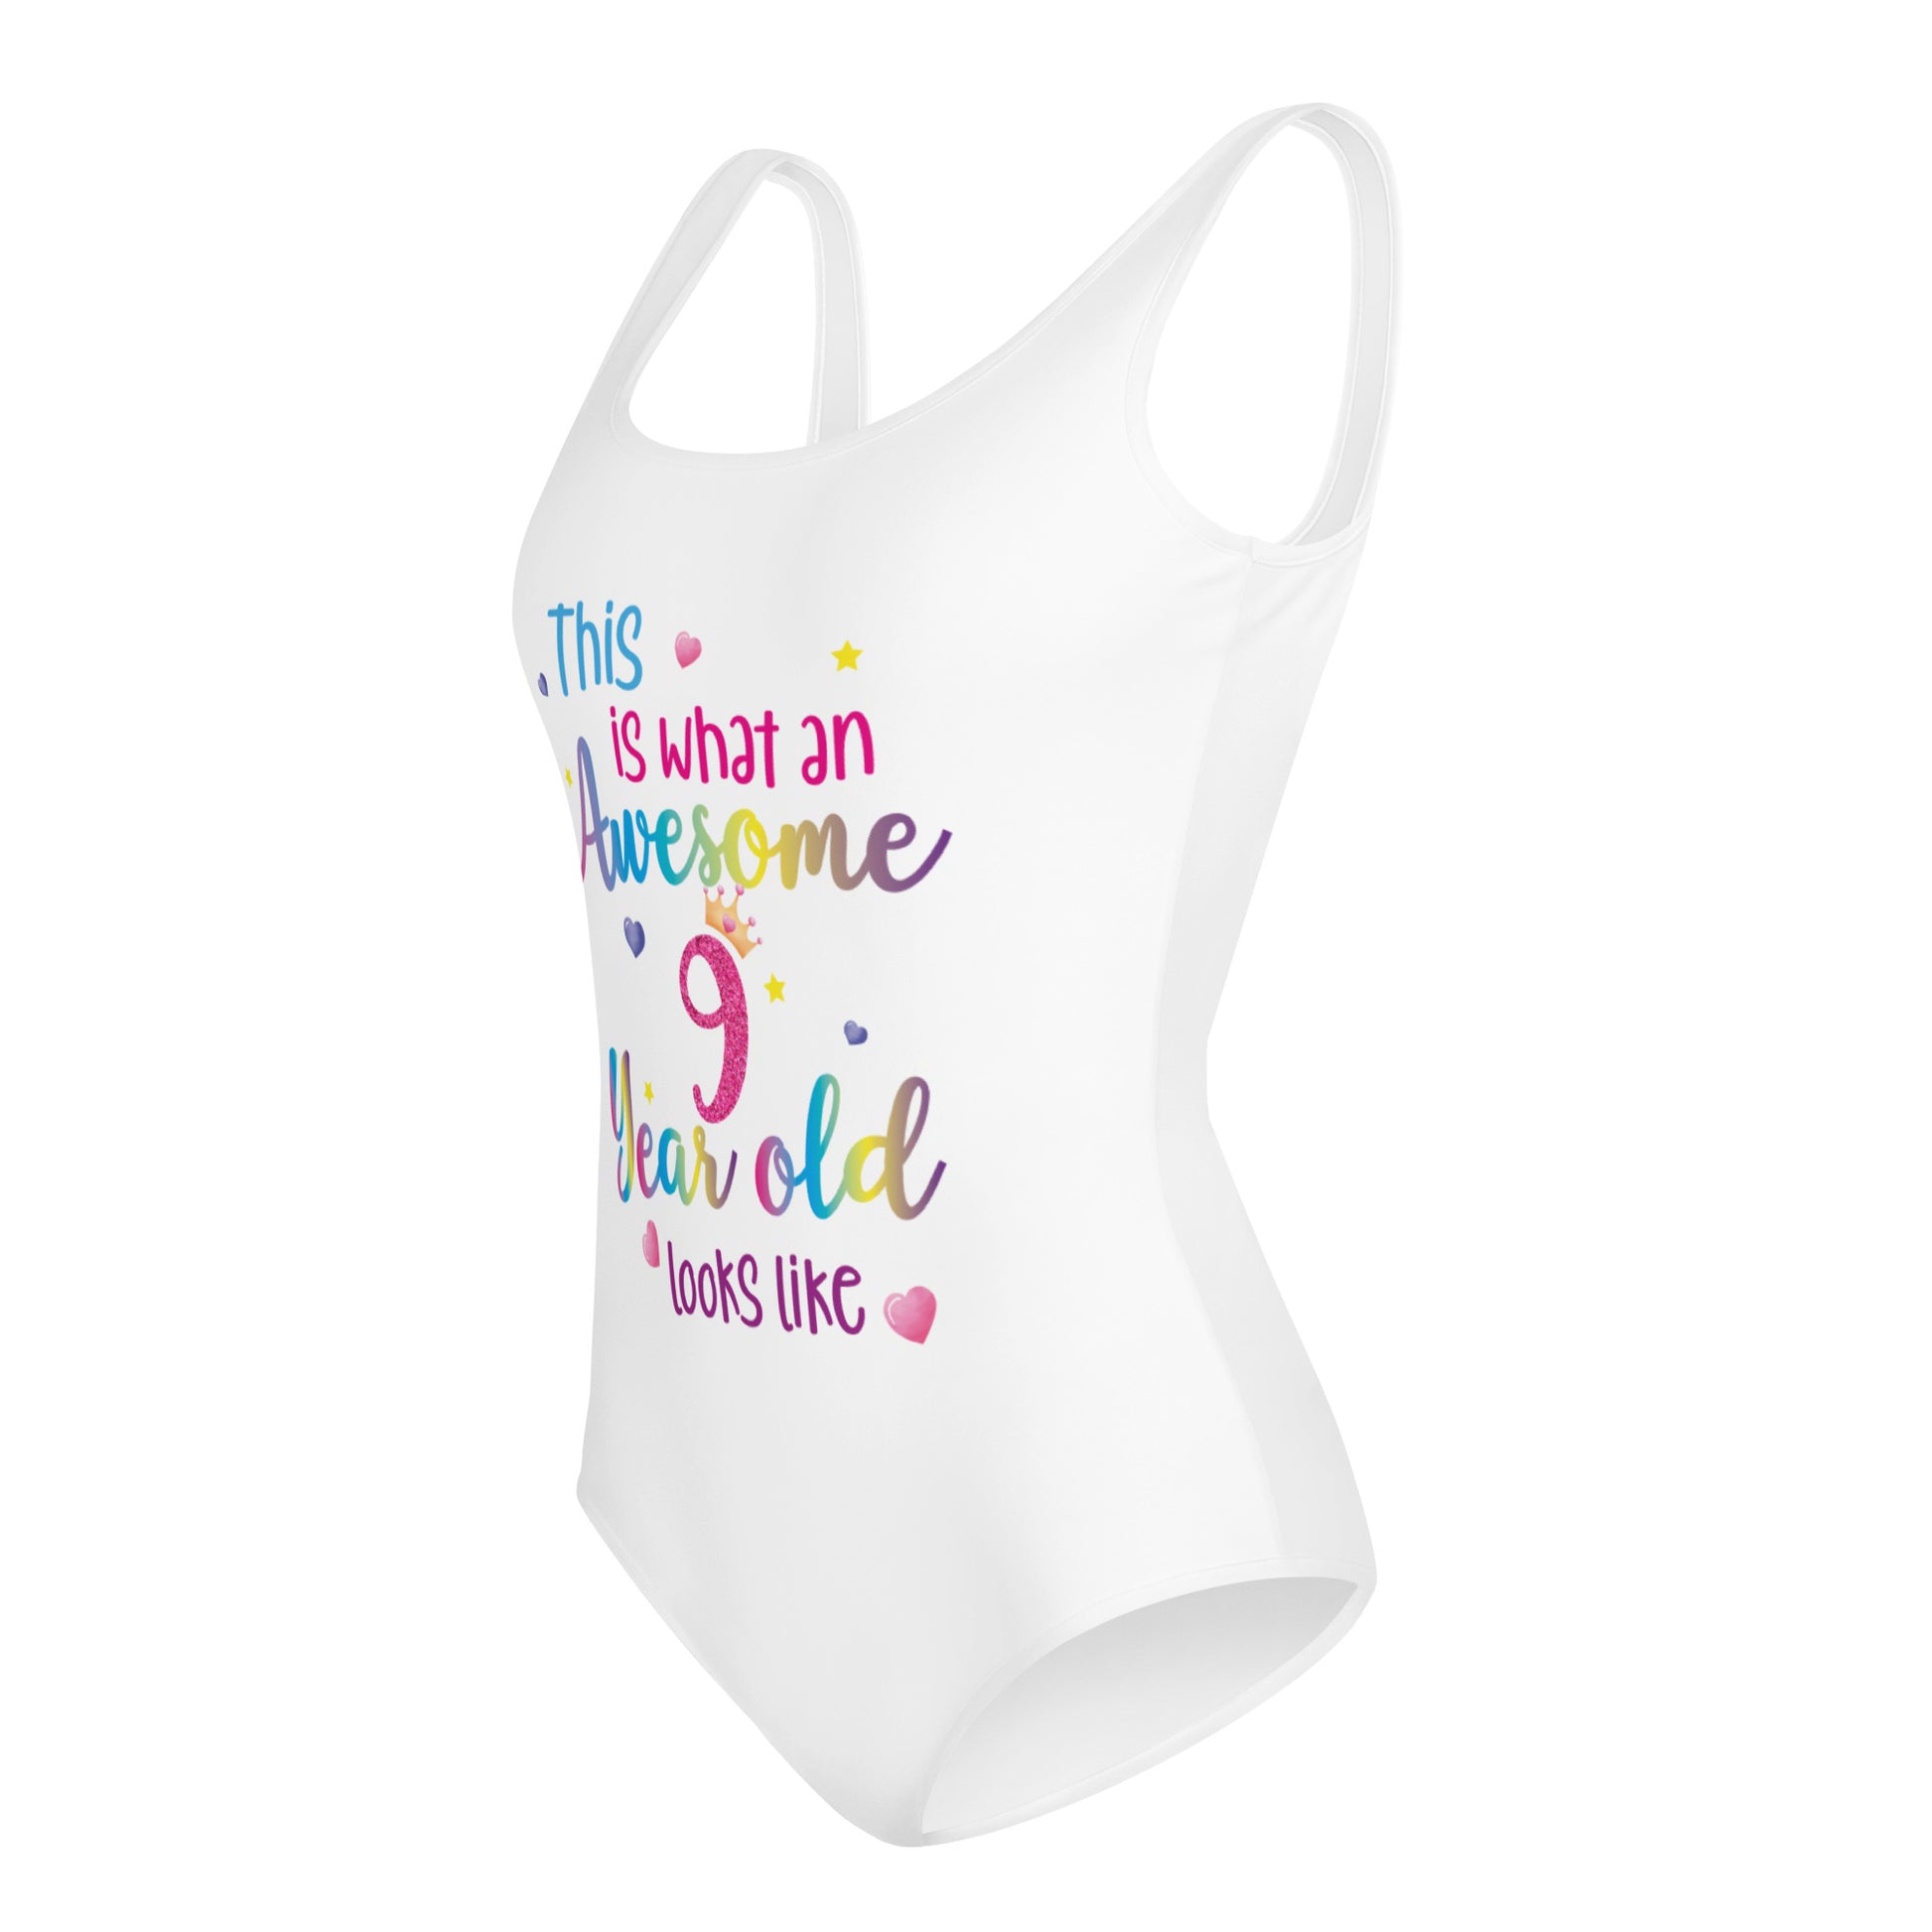 This is What an Awesome 9 Year Old Looks Like Girls Swimsuit, Birthday 9th Nine Year Fun Rainbow Party Gift Kids One Piece Bathing Suit Swimwear Starcove Fashion